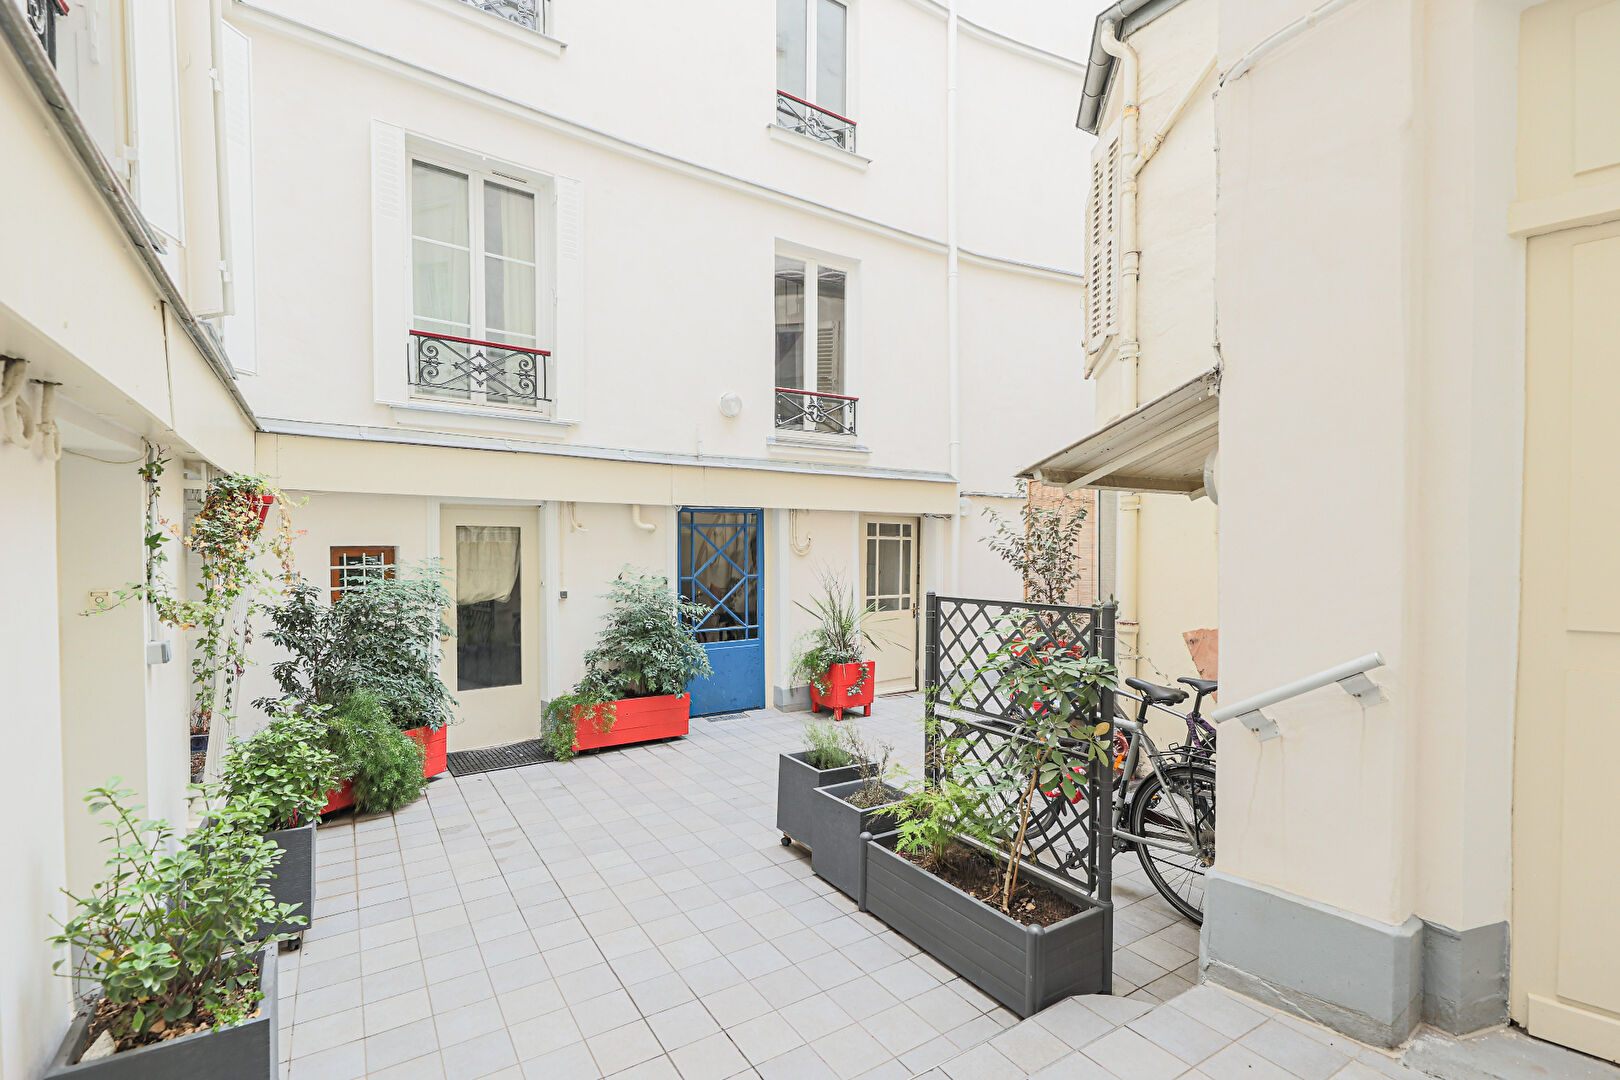 Beautiful studio in perfect condition located in the heart of the Abbesses! 10